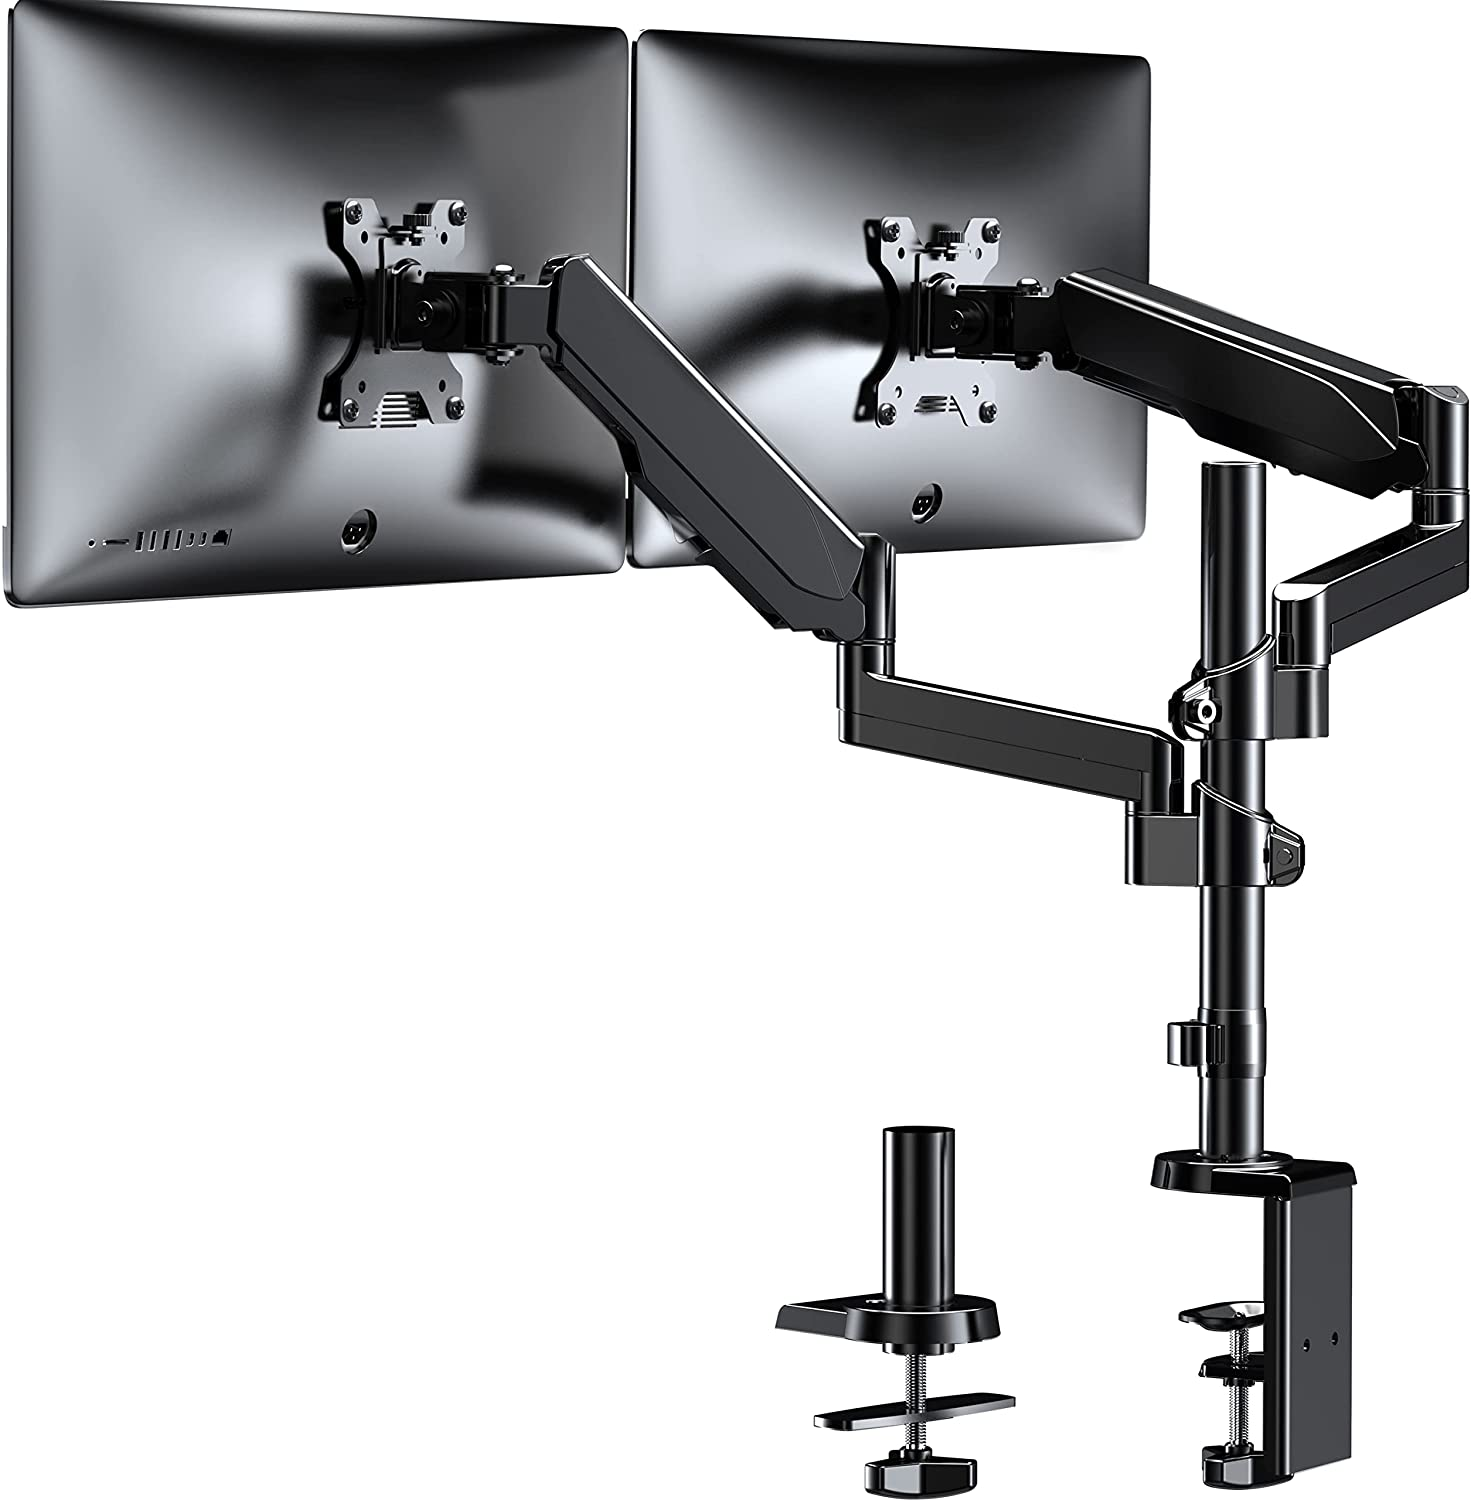 Amazon.com: WALI Premium Dual LCD Monitor Desk Mount Fully Adjustable Gas Spring Stand for Display up to 32 inch, GSDM002, (Black) : Everything Else $45